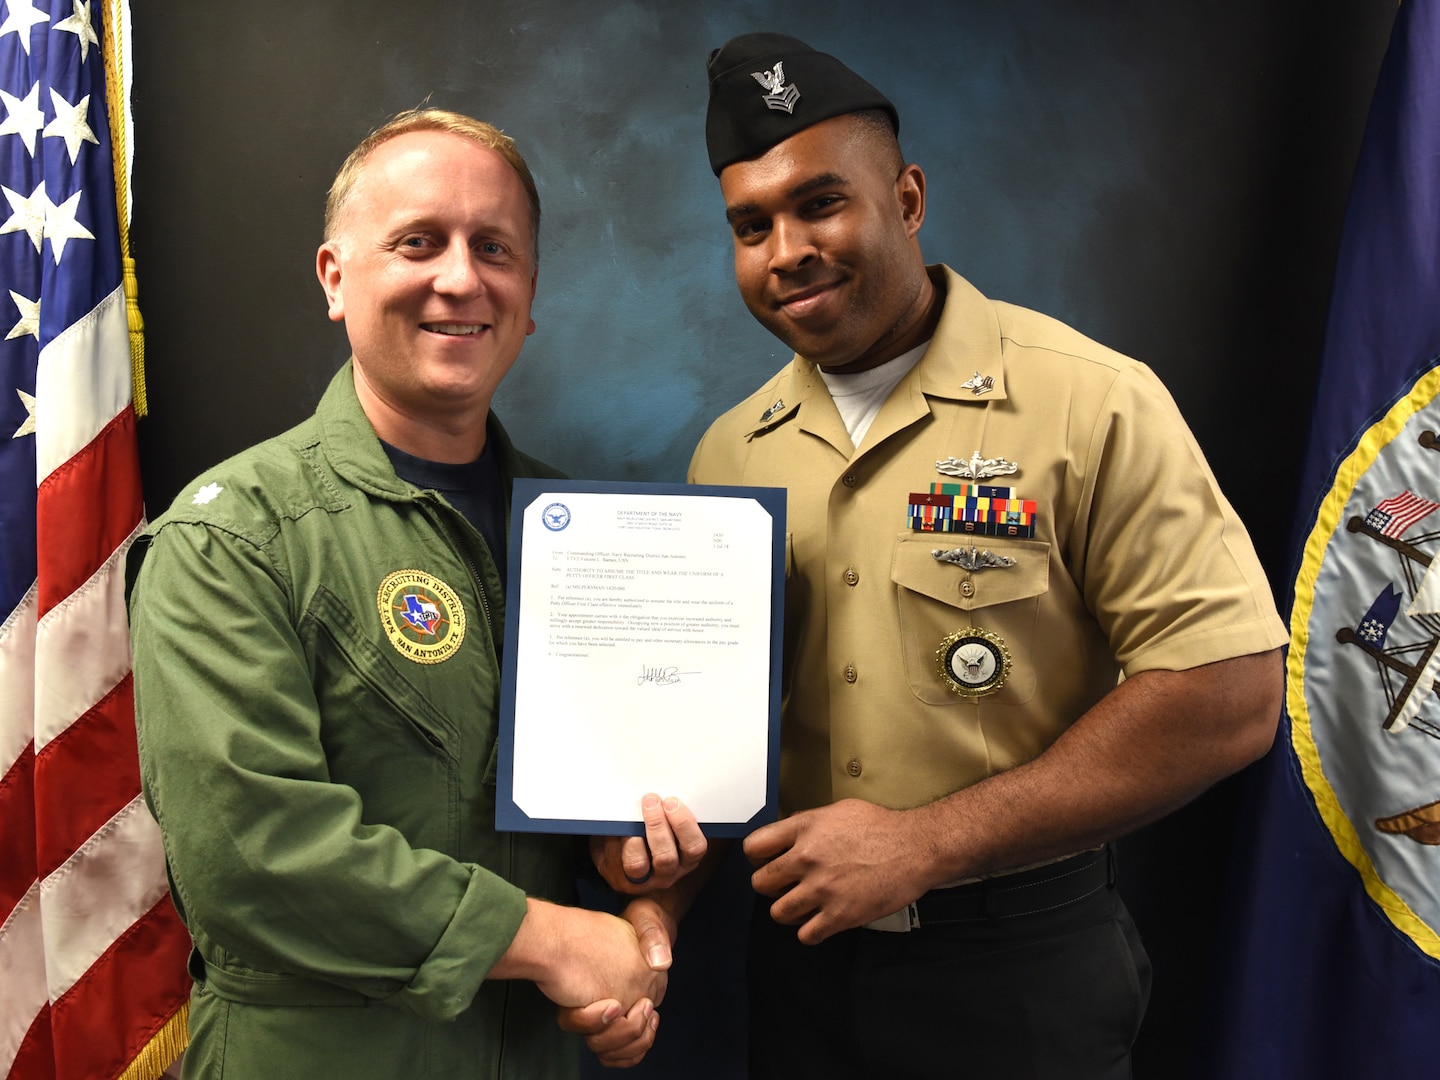 Vincent Barnes (right), assigned to Navy Recruiting Station New Braunfels, was meritoriously advanced to the rank of petty officer first class during a promotion ceremony held at Navy Recruiting District San Antonio Headquarters by Cmdr. Jeffrey Reynolds.